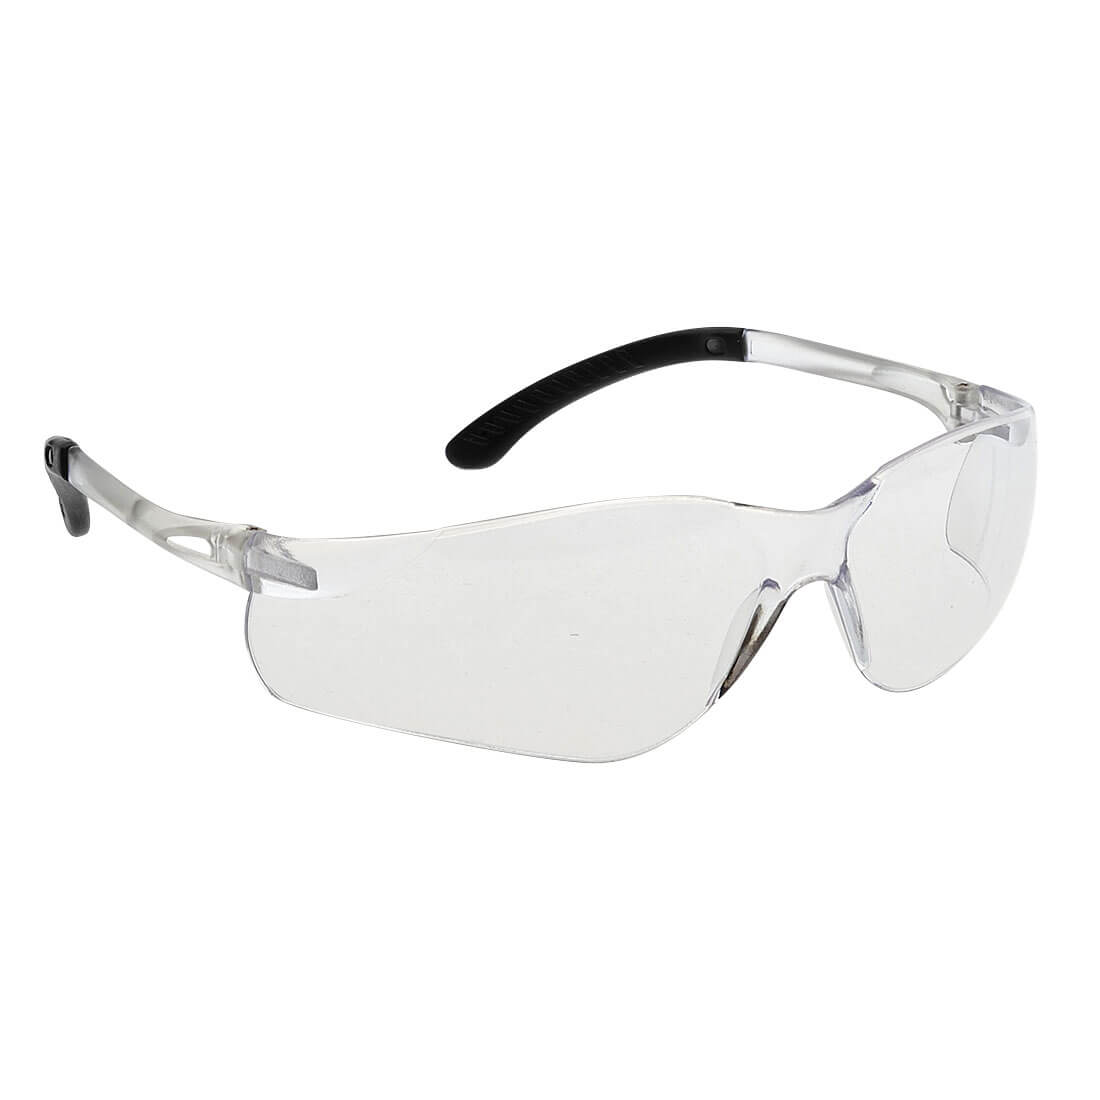 Portwest PW38 - Clear Lens Black Frame Safety Glasses Pan View CE certified